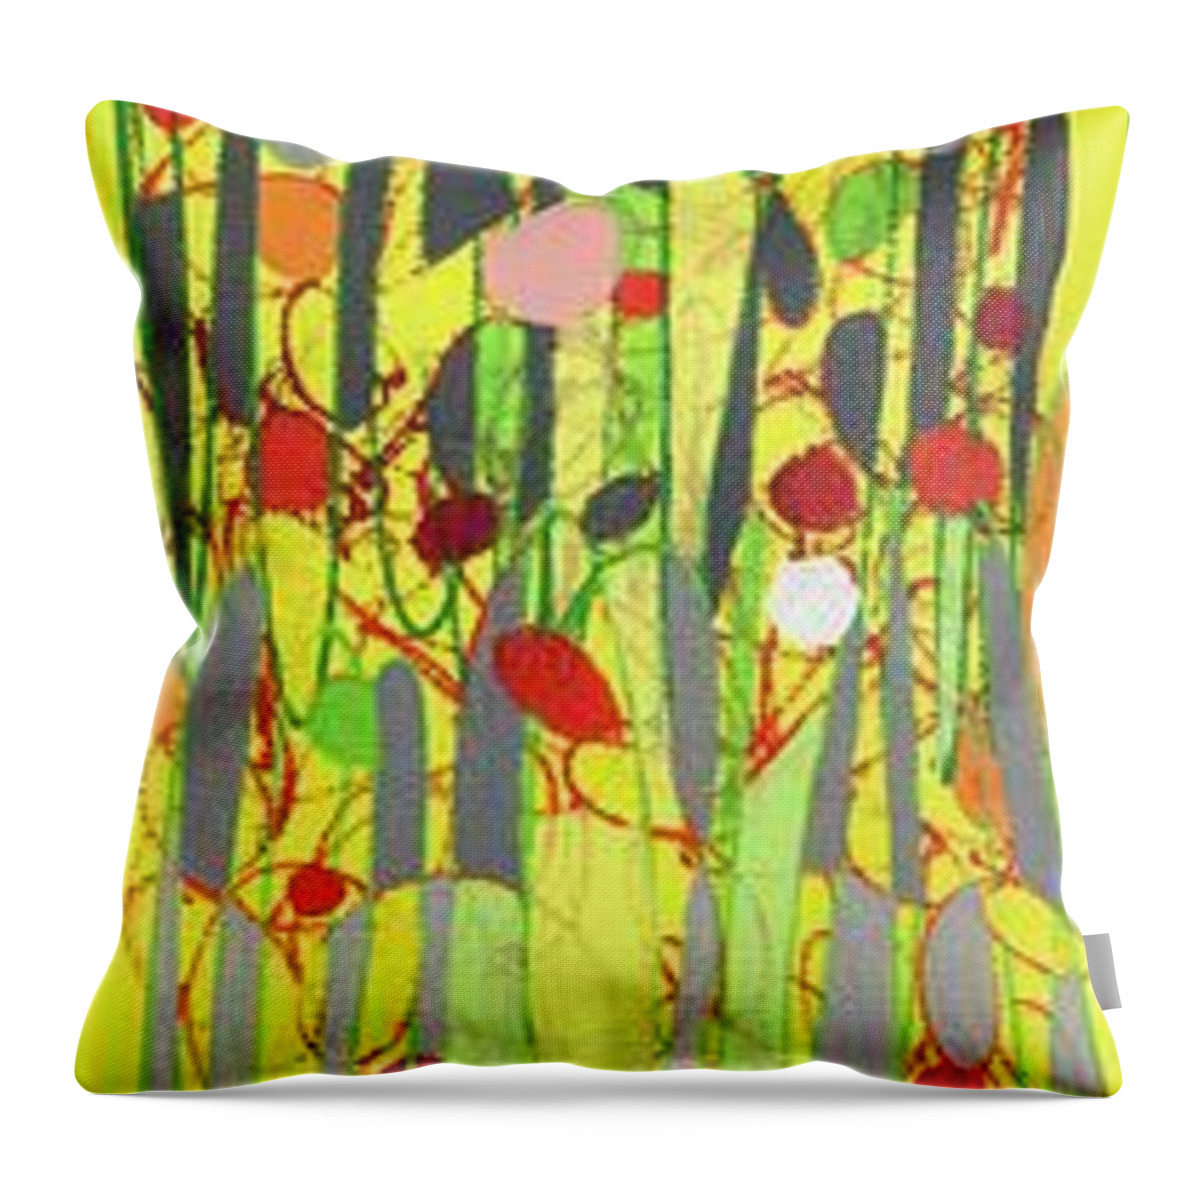 Sunny Throw Pillow featuring the painting Sunny Days One by Lynne Taetzsch